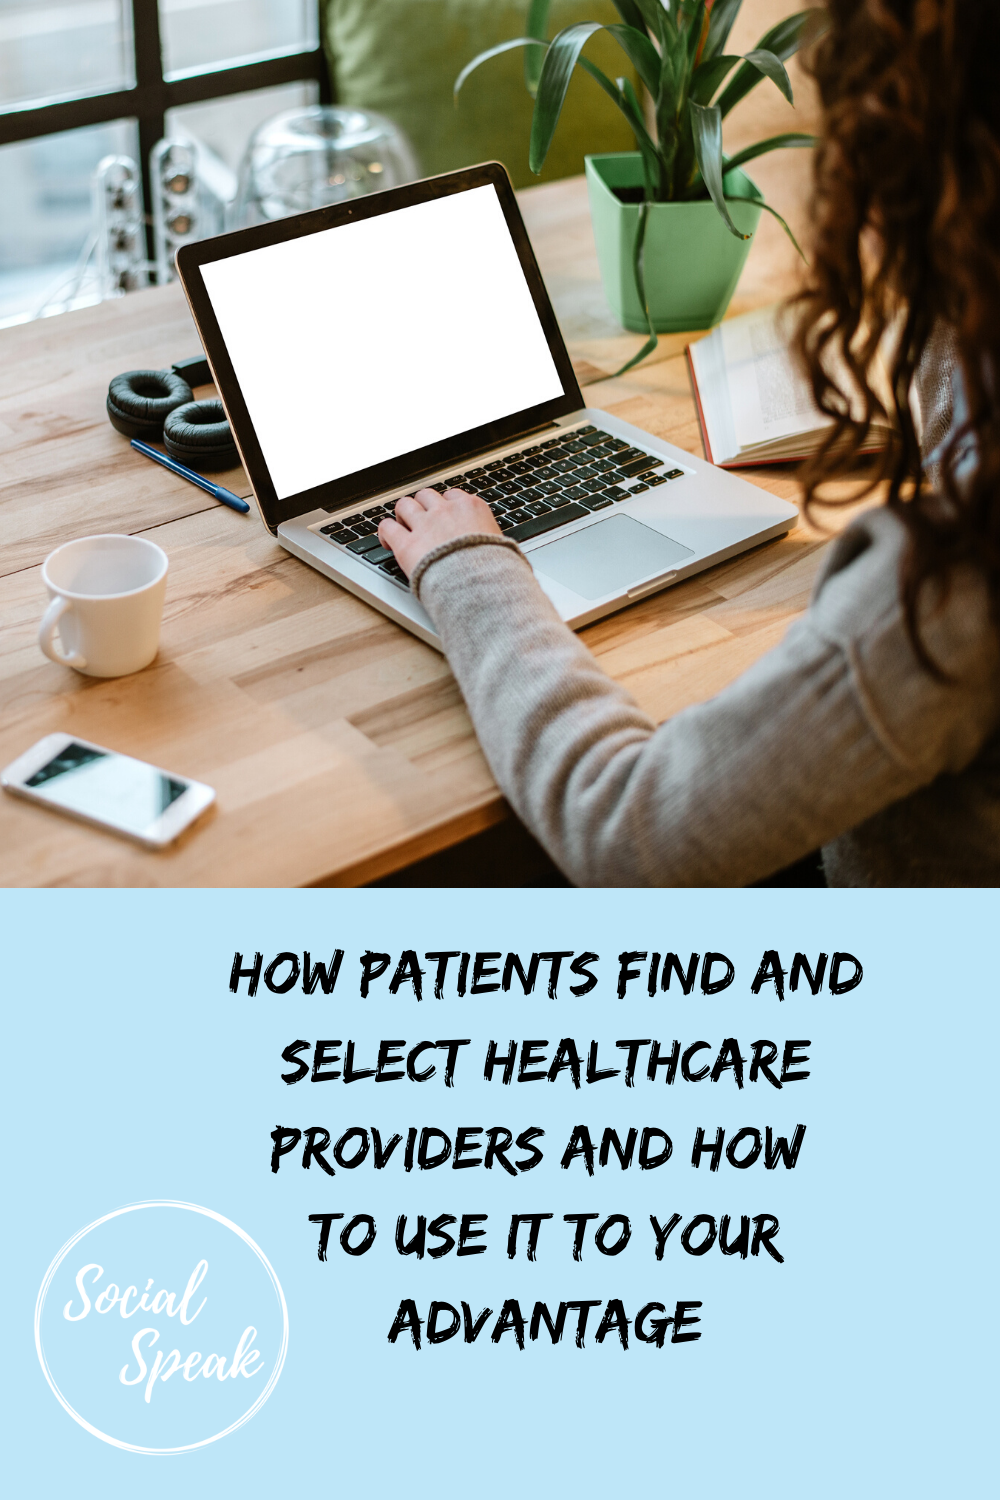 How Patients Find and Select Healthcare Providers and How to Use it to Your Advantage